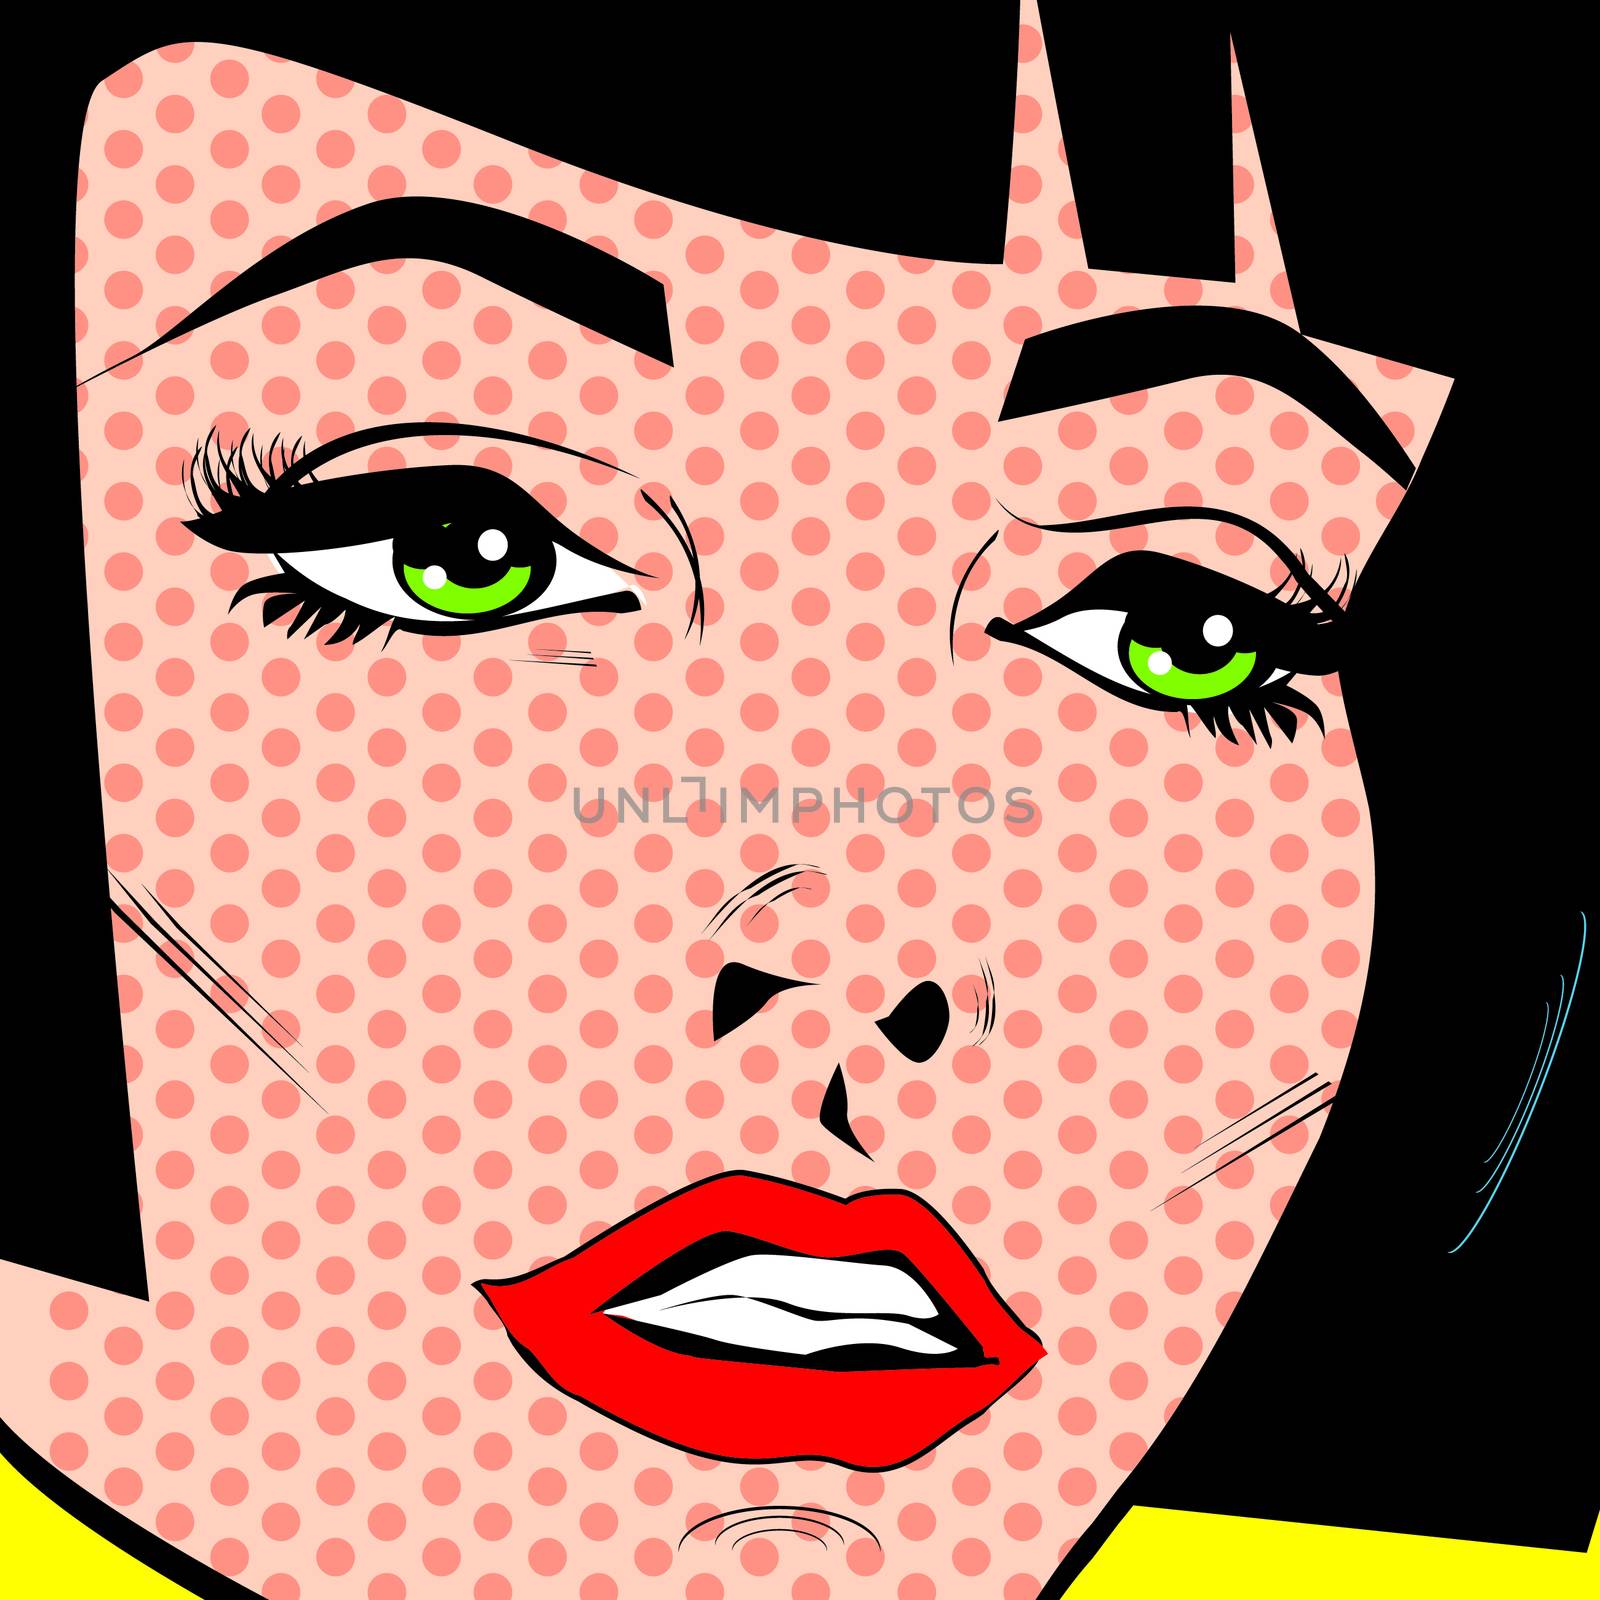 Vintage woman face pop art retro poster by IconsJewelry